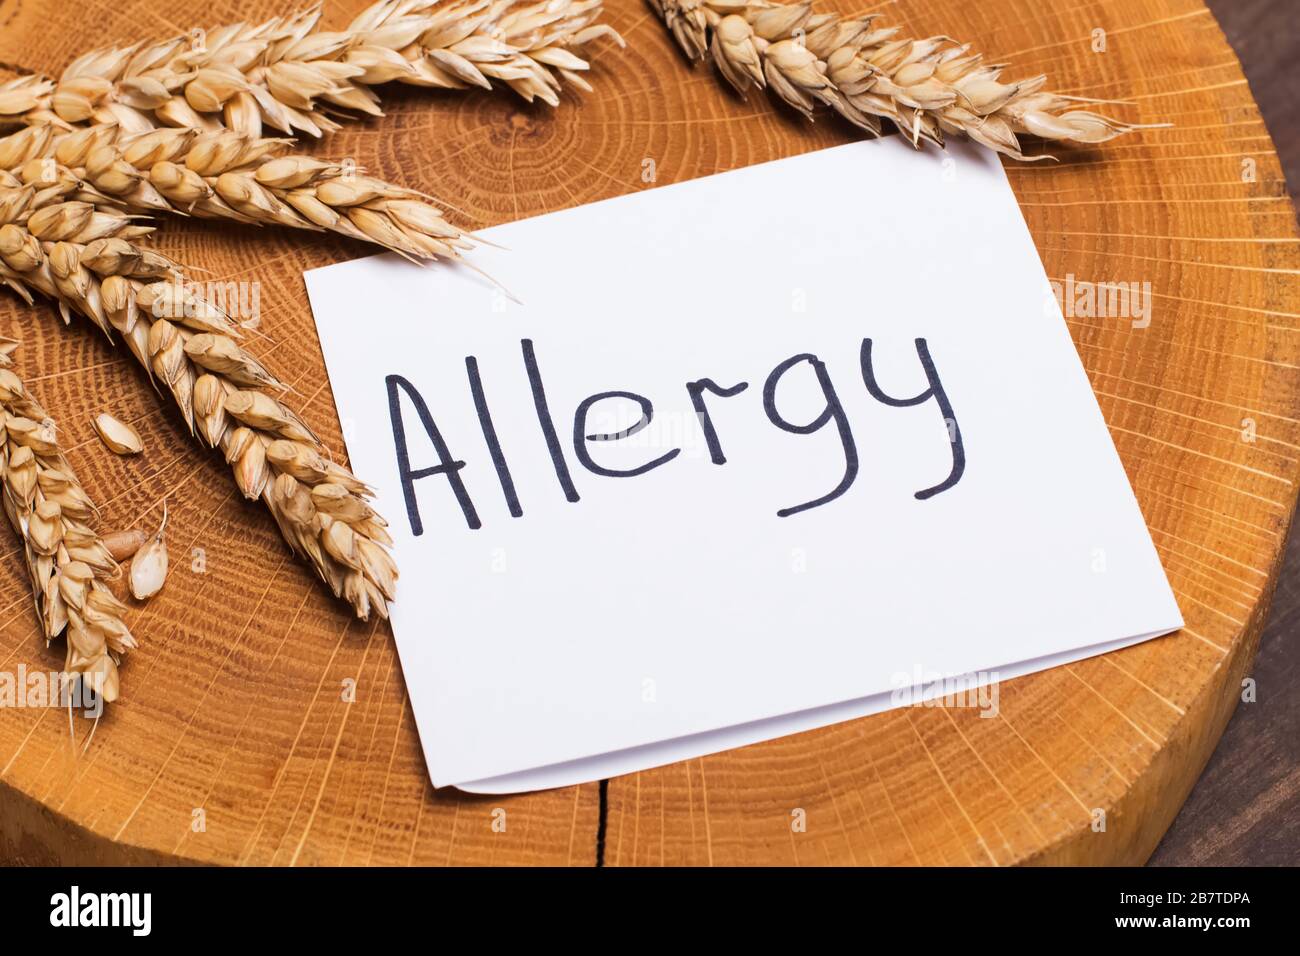 Wheat ears on wooden board and paper with text Allergy. Stock Photo